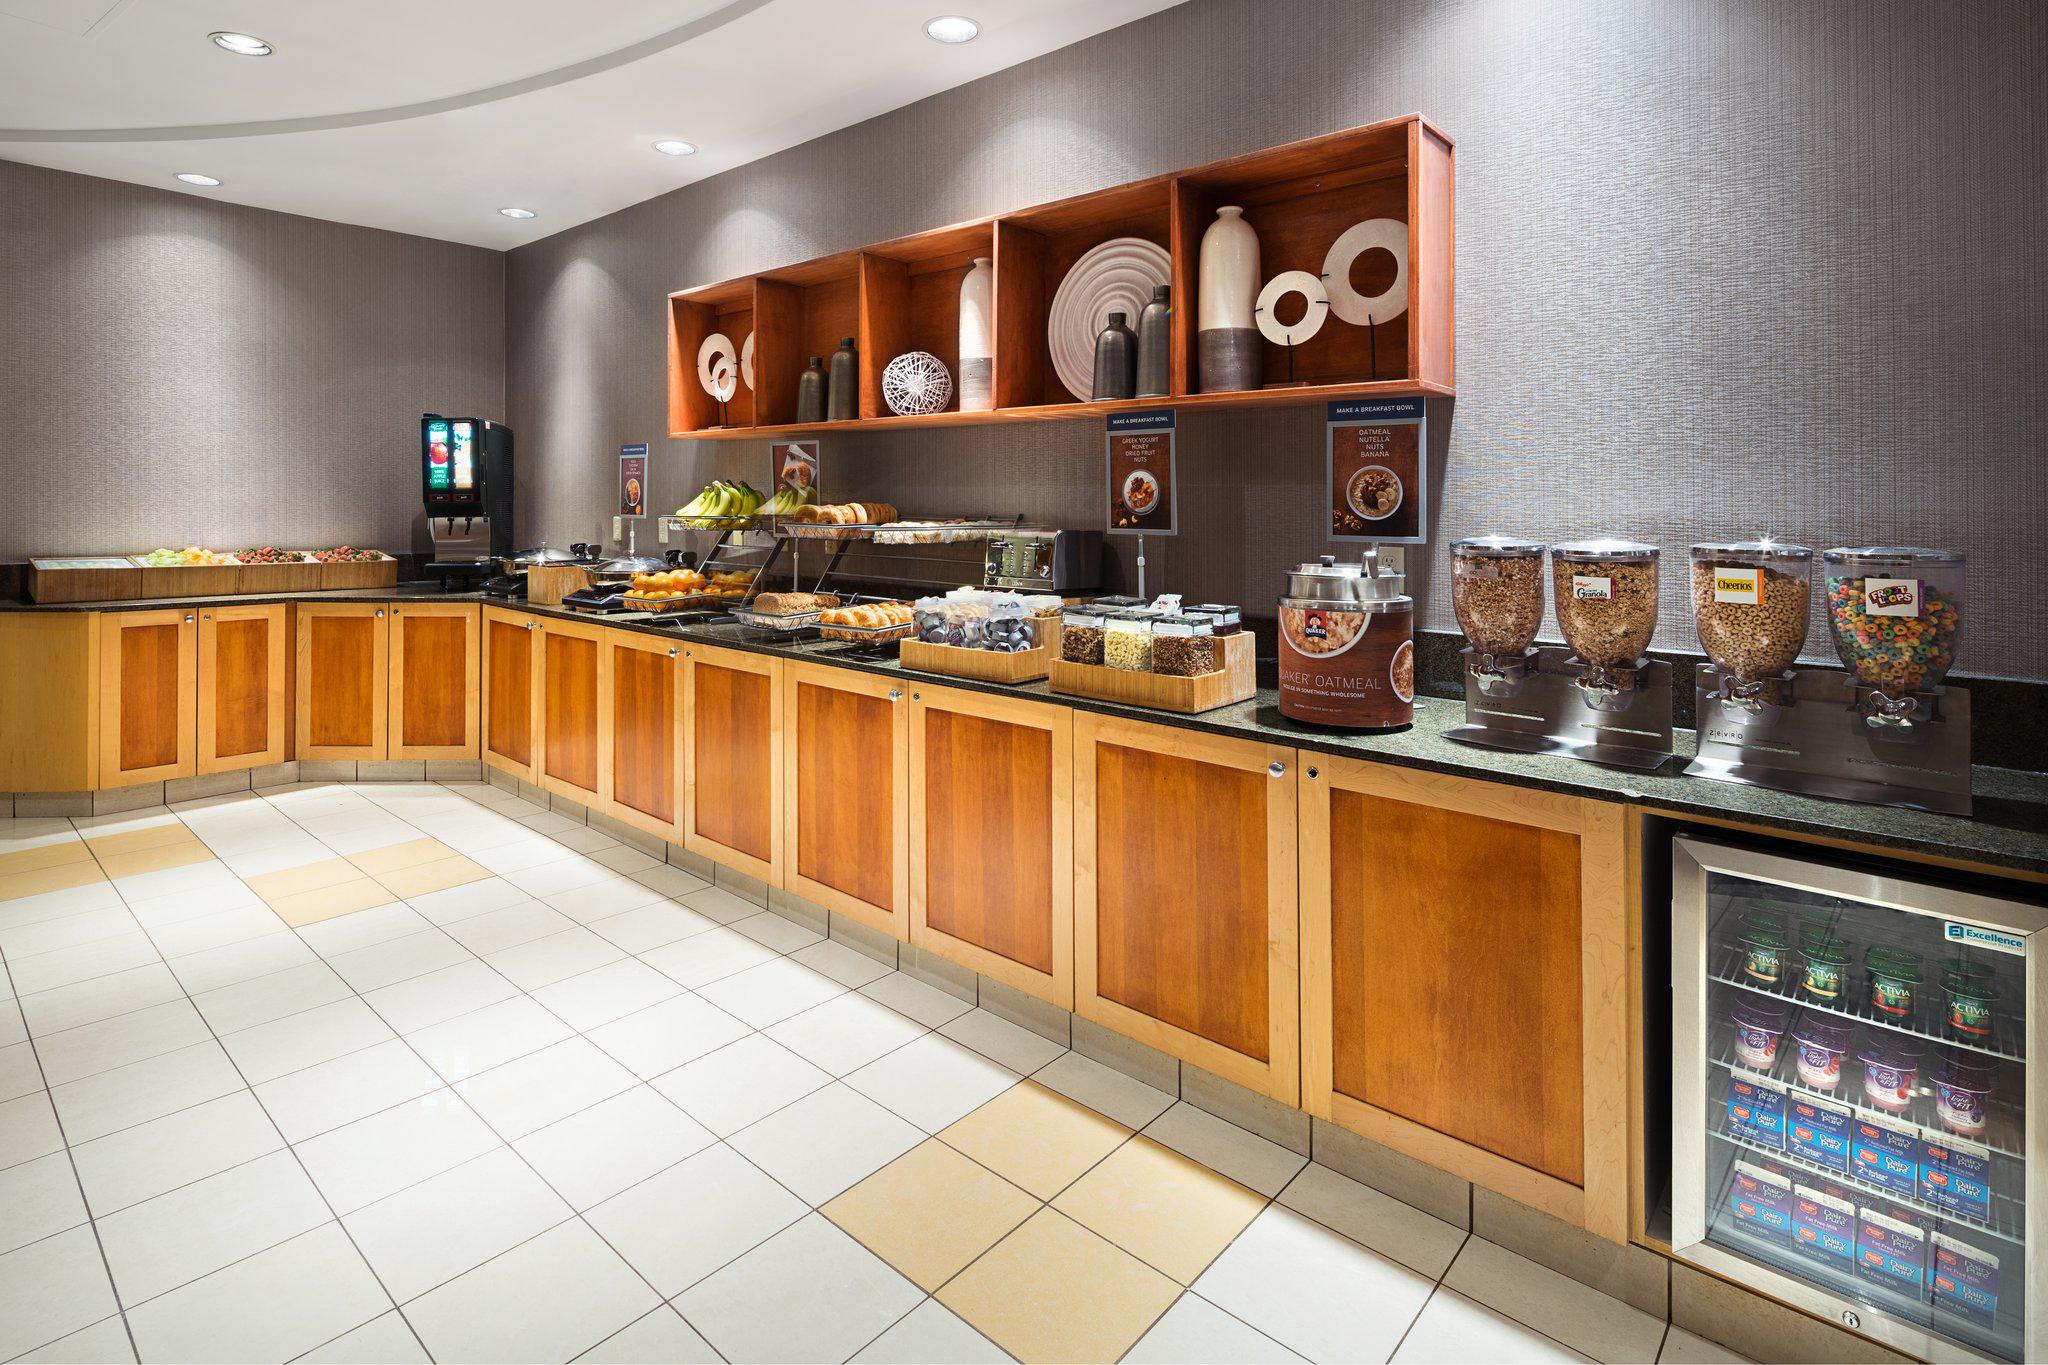 SpringHill Suites by Marriott Denver Airport Photo